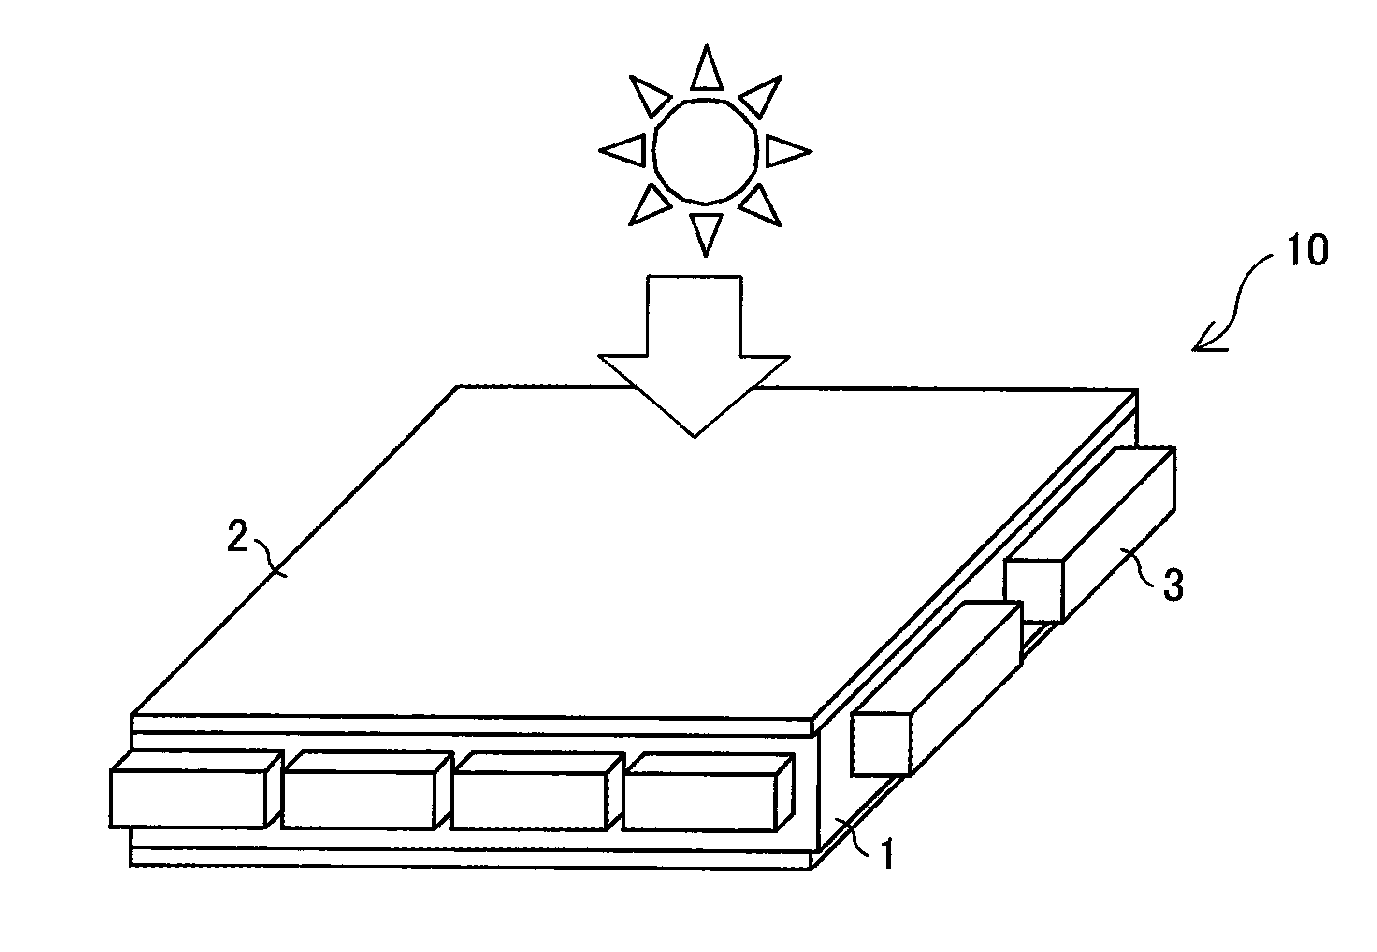 Solar cell module and solar photovoltaic system